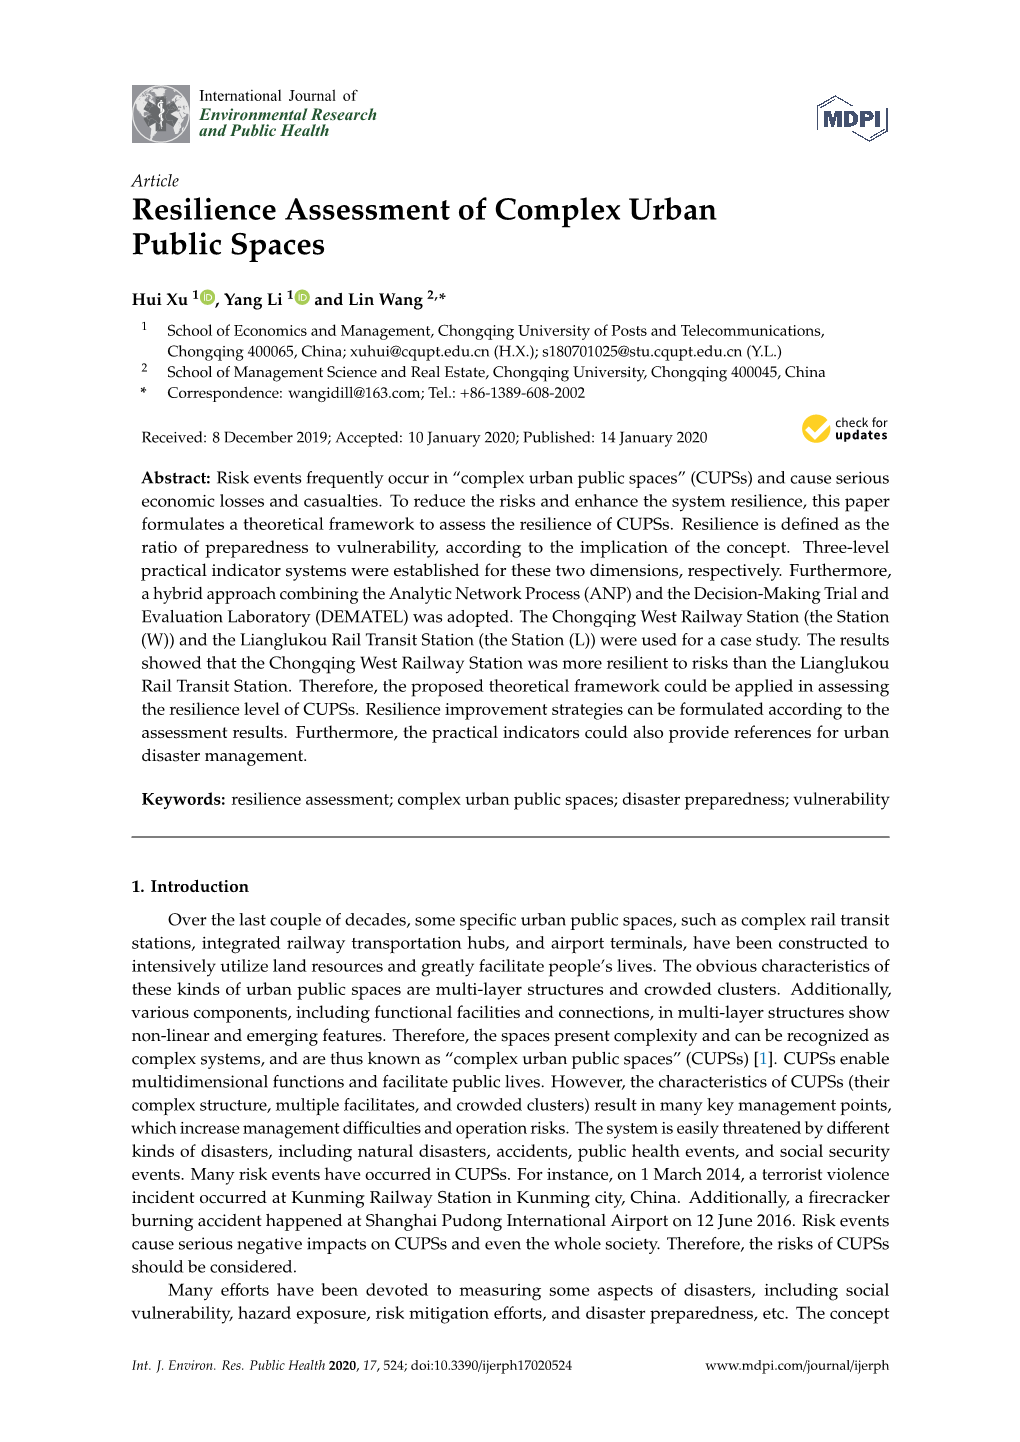 Resilience Assessment of Complex Urban Public Spaces